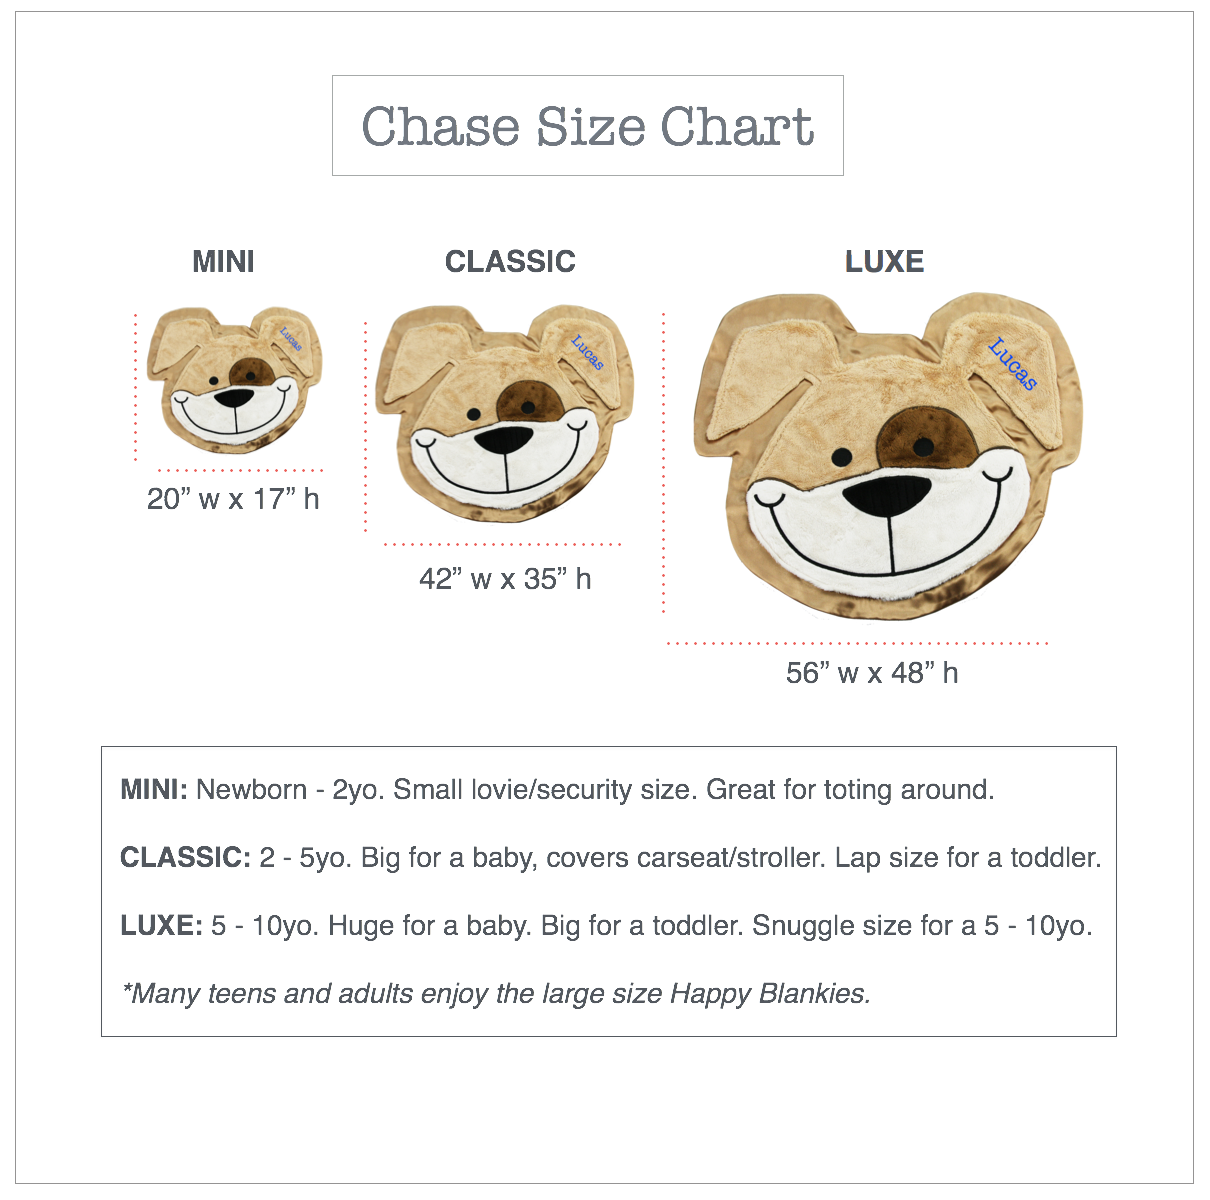 chase-size-chart.png